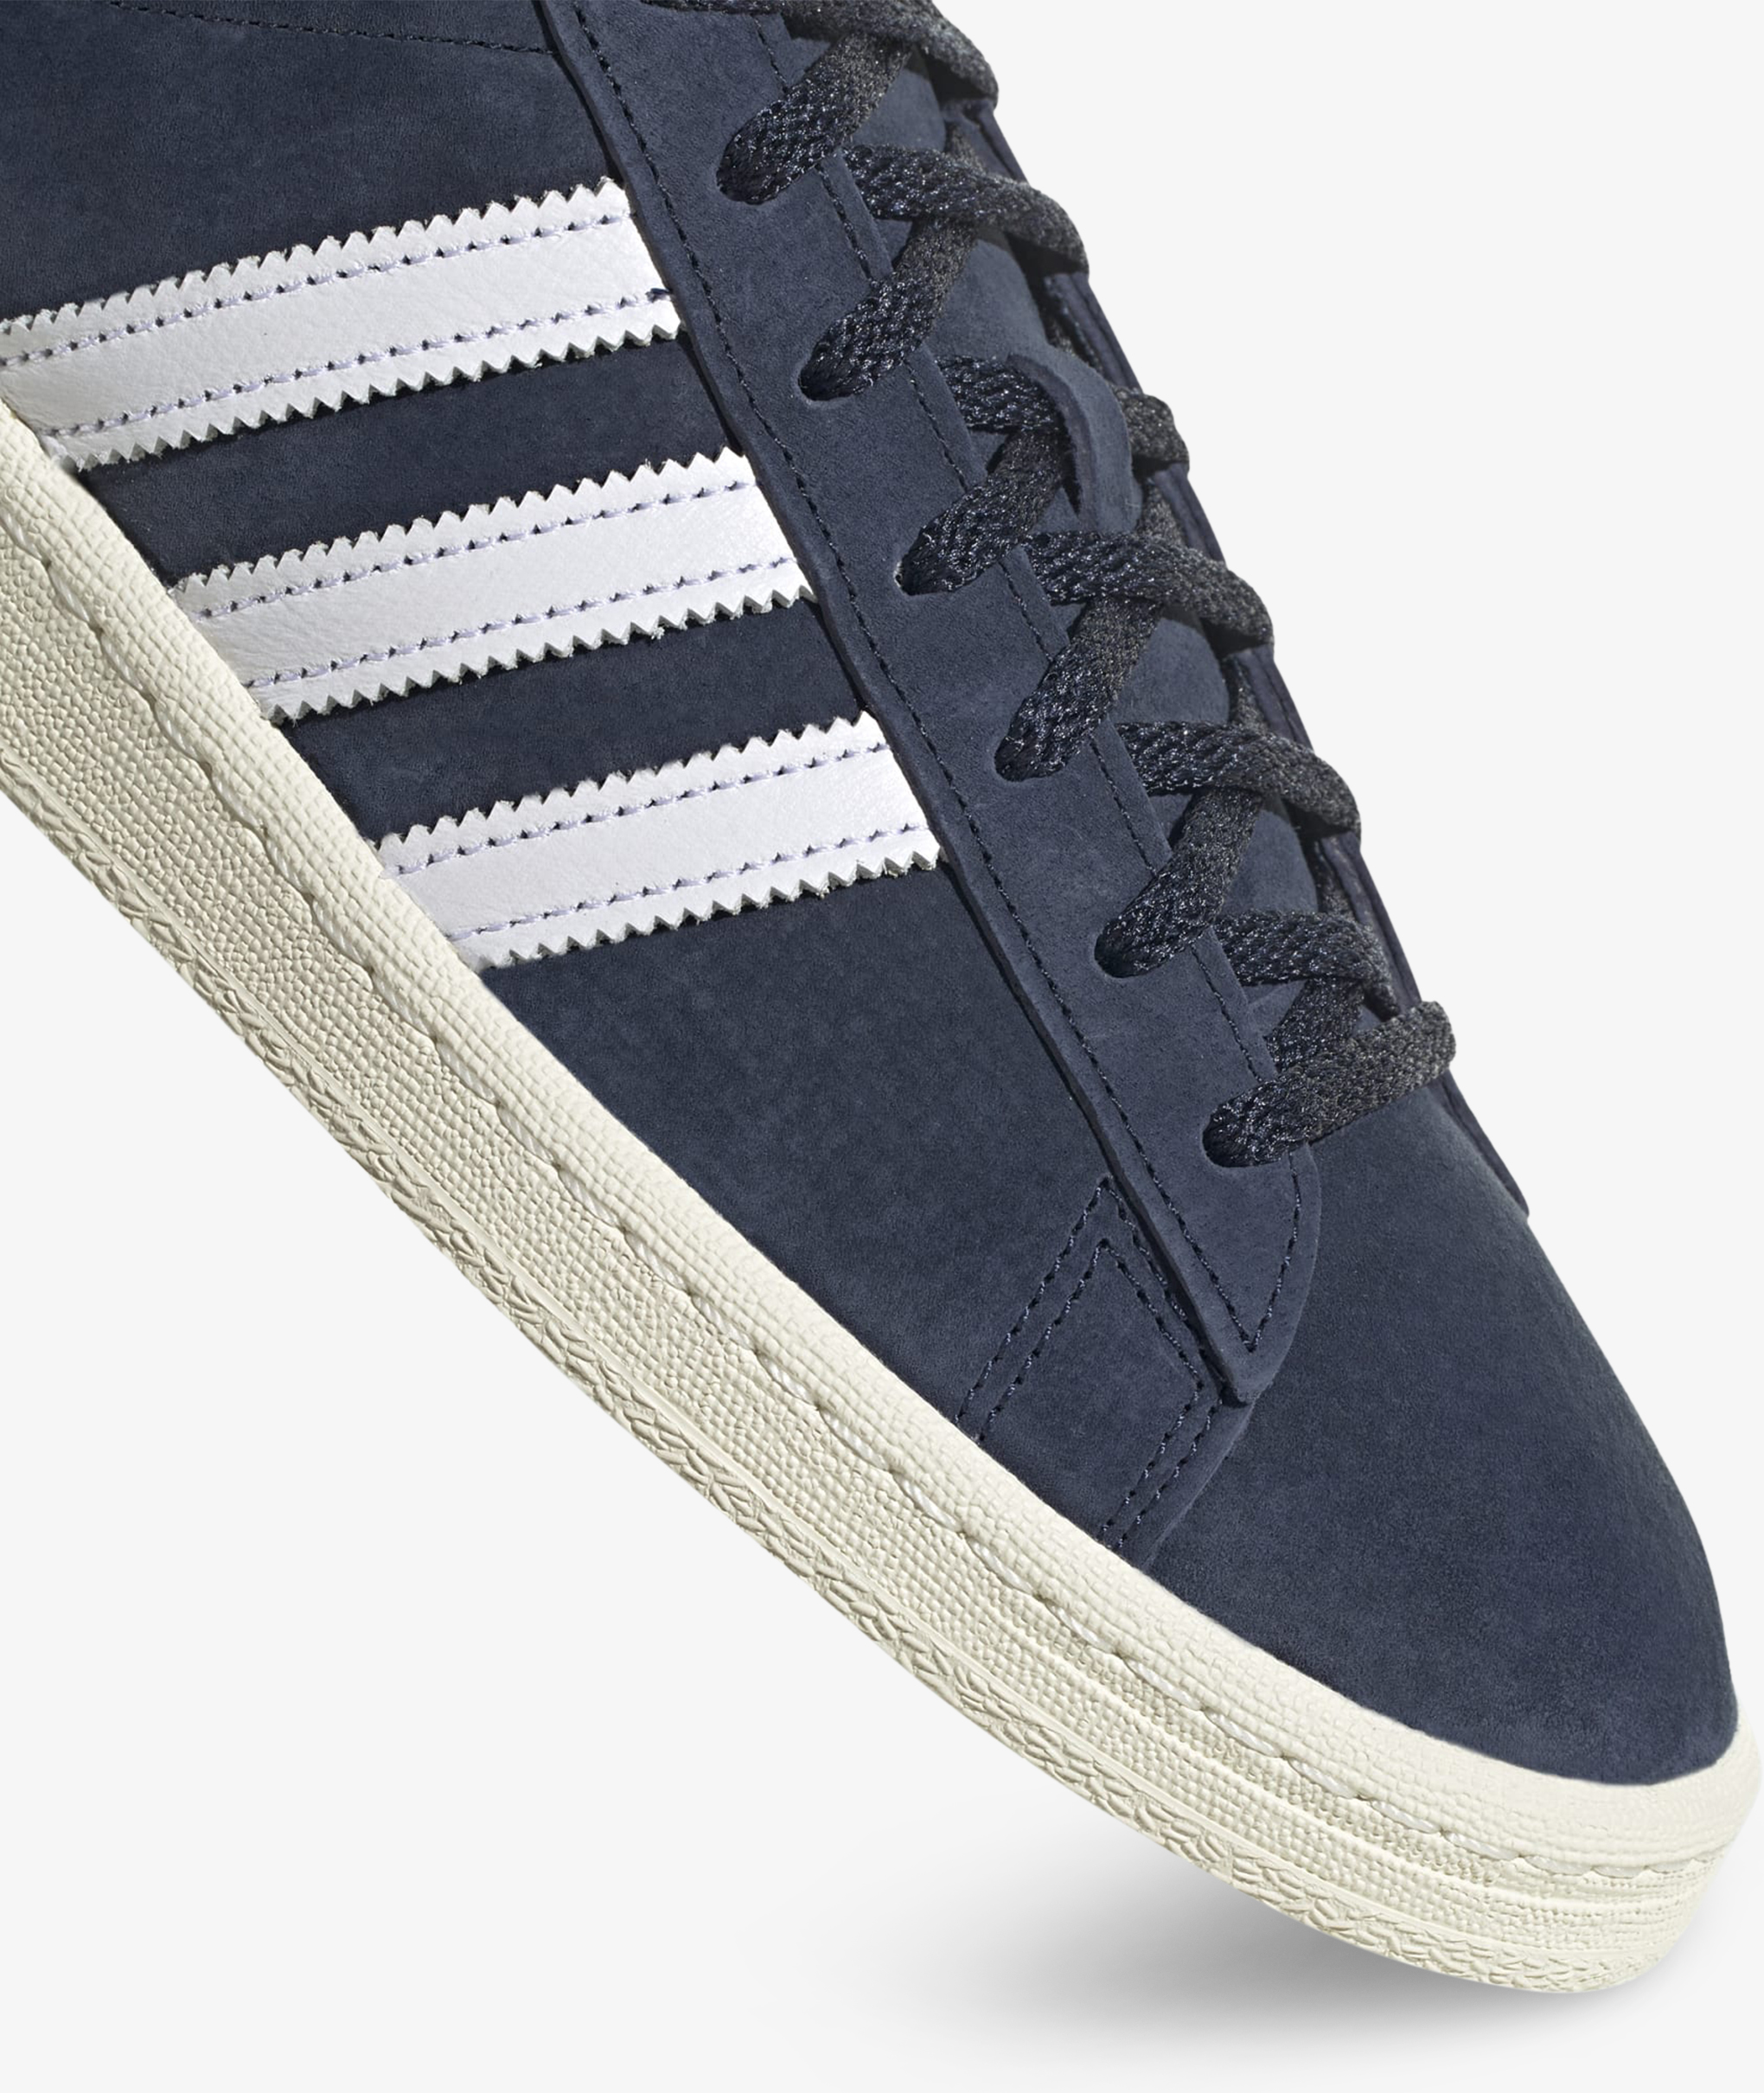 Norse Store Originals CAMPUS adidas 80s Worldwide | - - CONAVY/FTWWH Shipping